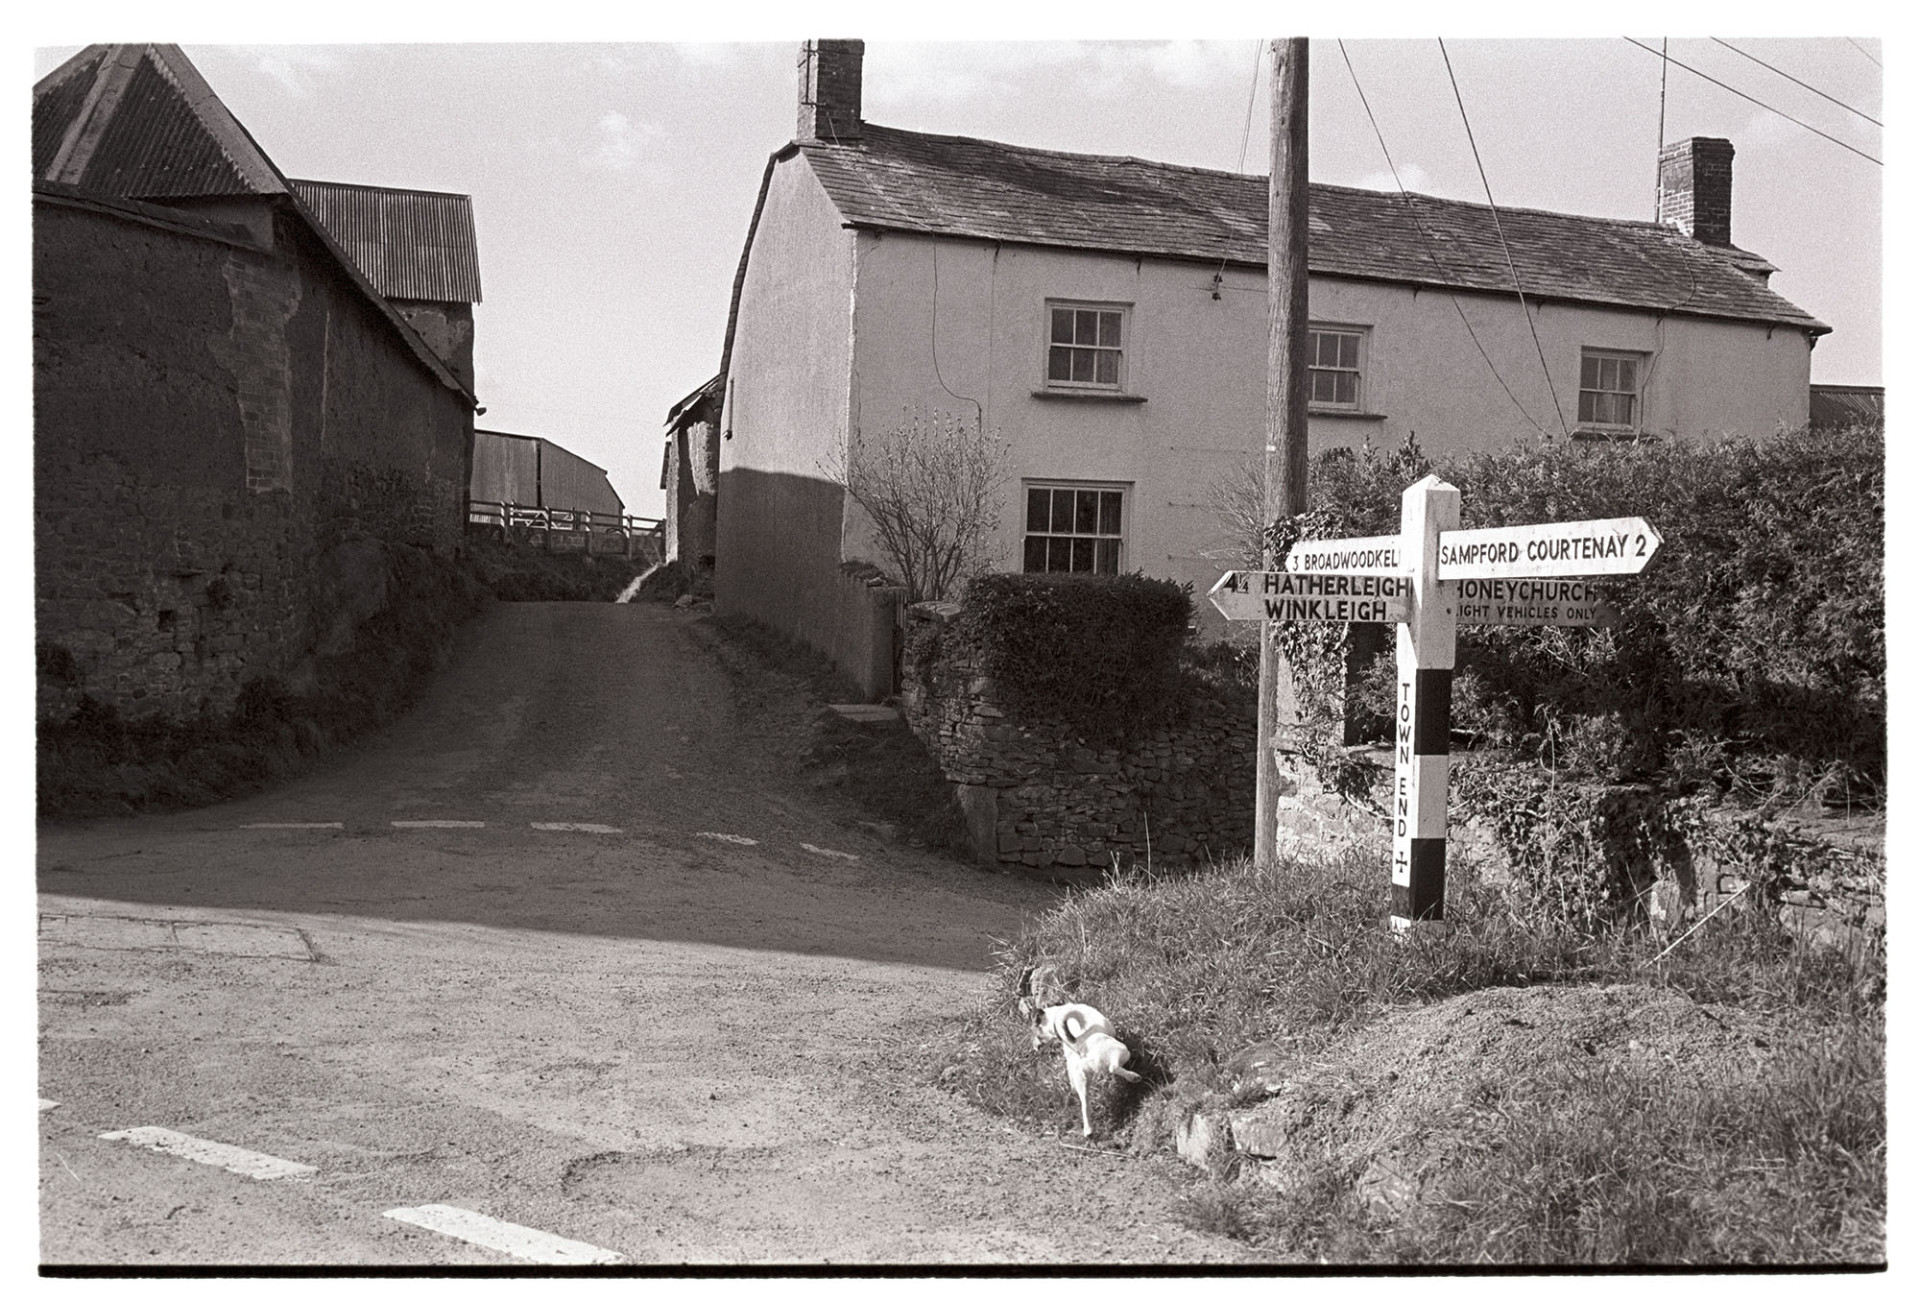 Street scene, sign post with dog peeing. 
[A dog urinating on the verge by the Town End Cross signpost at Exbourne. A house and barns can be seen further up the road in the background.]